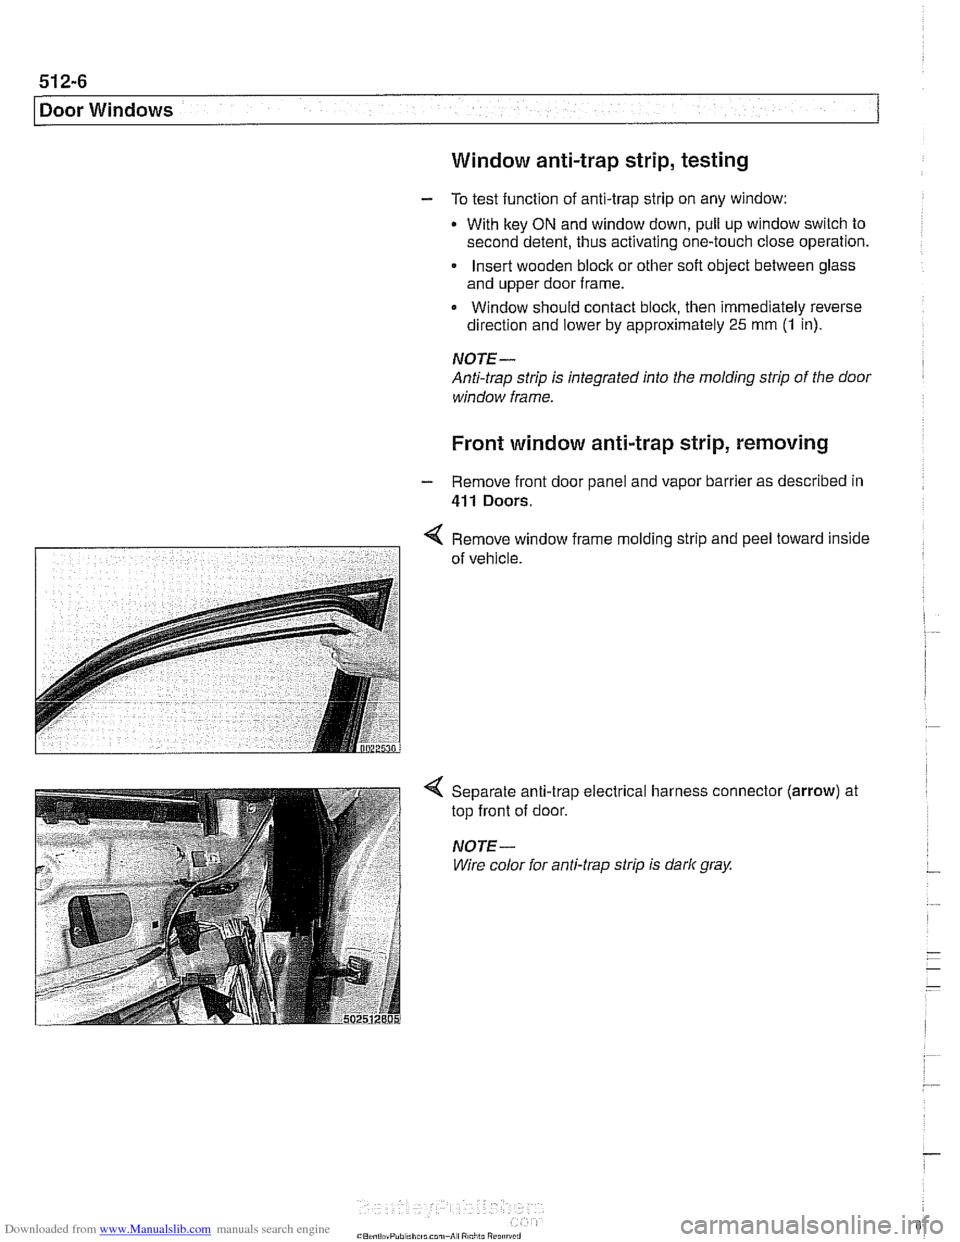 BMW 528i 2000 E39 User Guide Downloaded from www.Manualslib.com manuals search engine 
Door Windows 
Window anti-trap strip, testing 
- To test  function  of anti-trap strip  on any  window: 
With  key 
ON and window down,  pull 